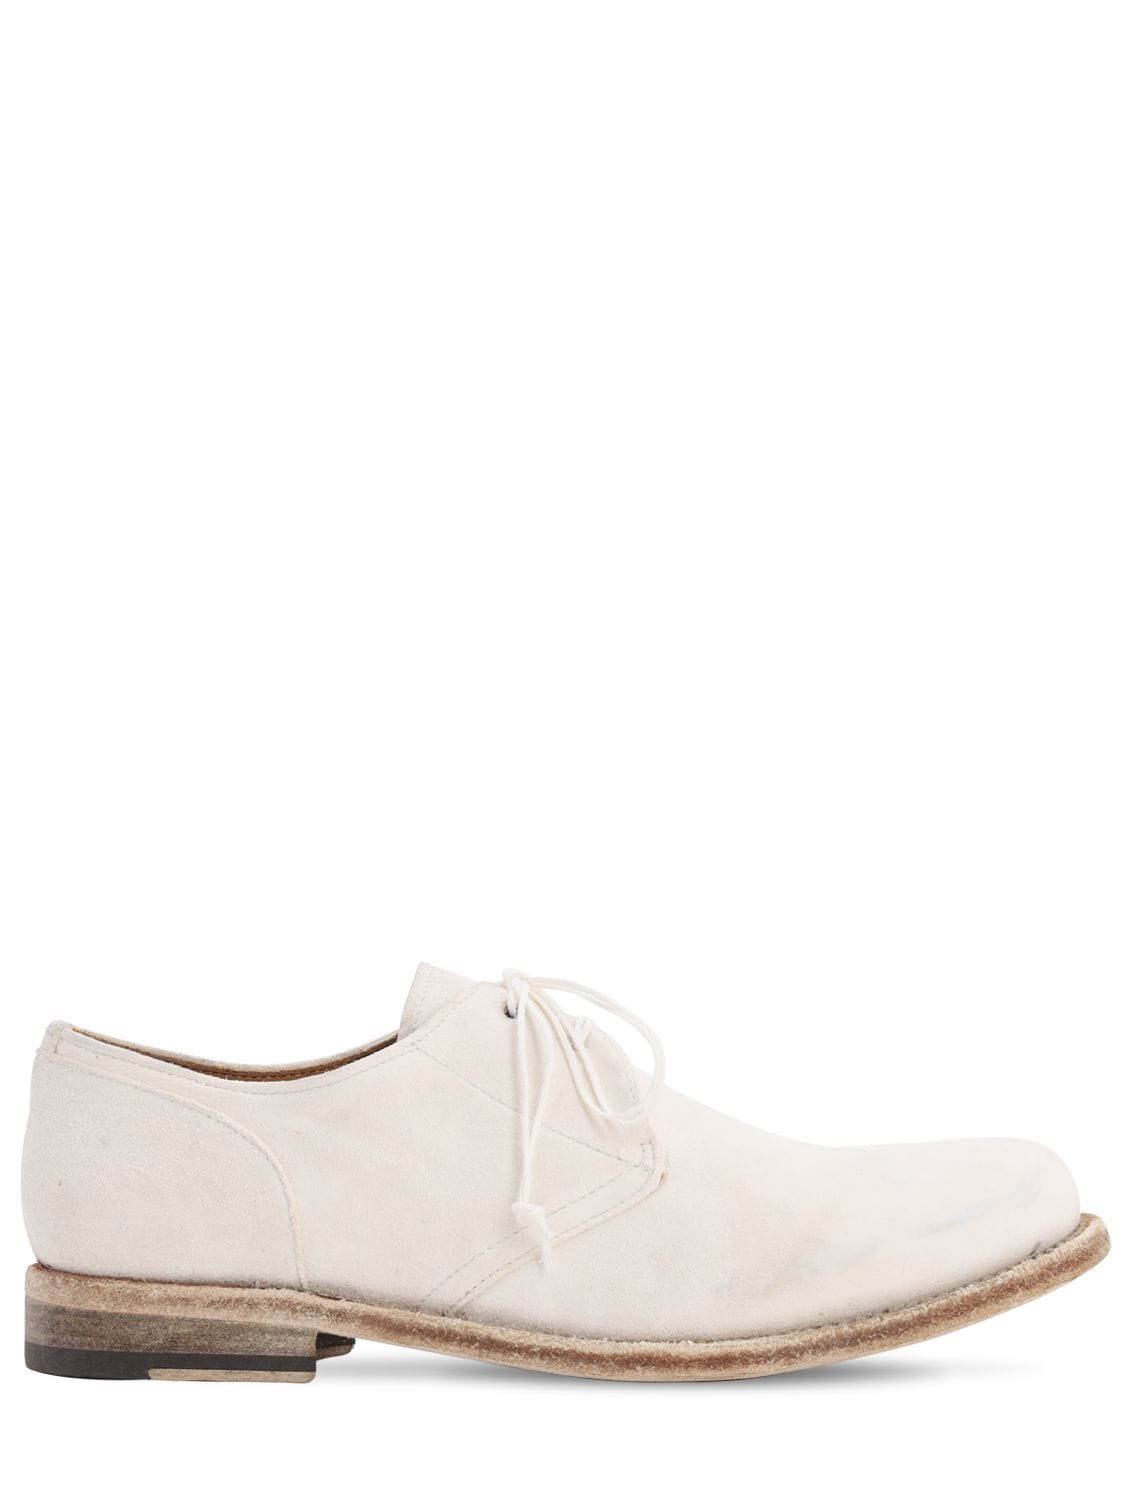 Shoto 25mm Leather & Suede Lace-up Derby Shoes In White